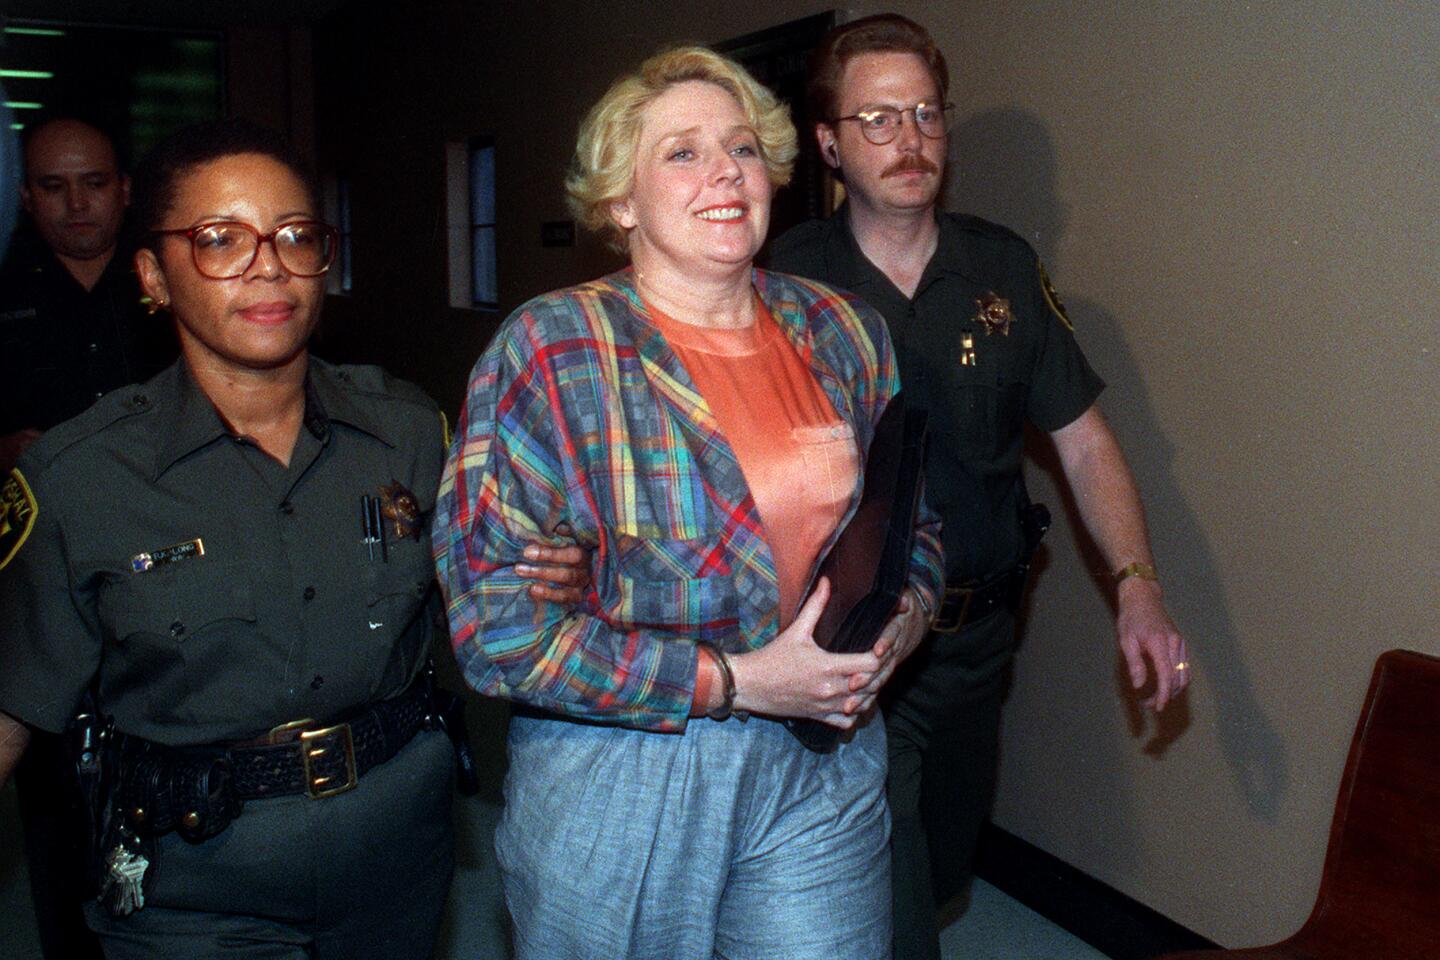 Elisabeth "Betty" Broderick is led by marshals through the hallways of the downtown San Diego County Courthouse on her way to a holding cell after being convicted of the murder of her ex-husband, Dan, and his new wife, Linda, on Dec. 10, 1991.